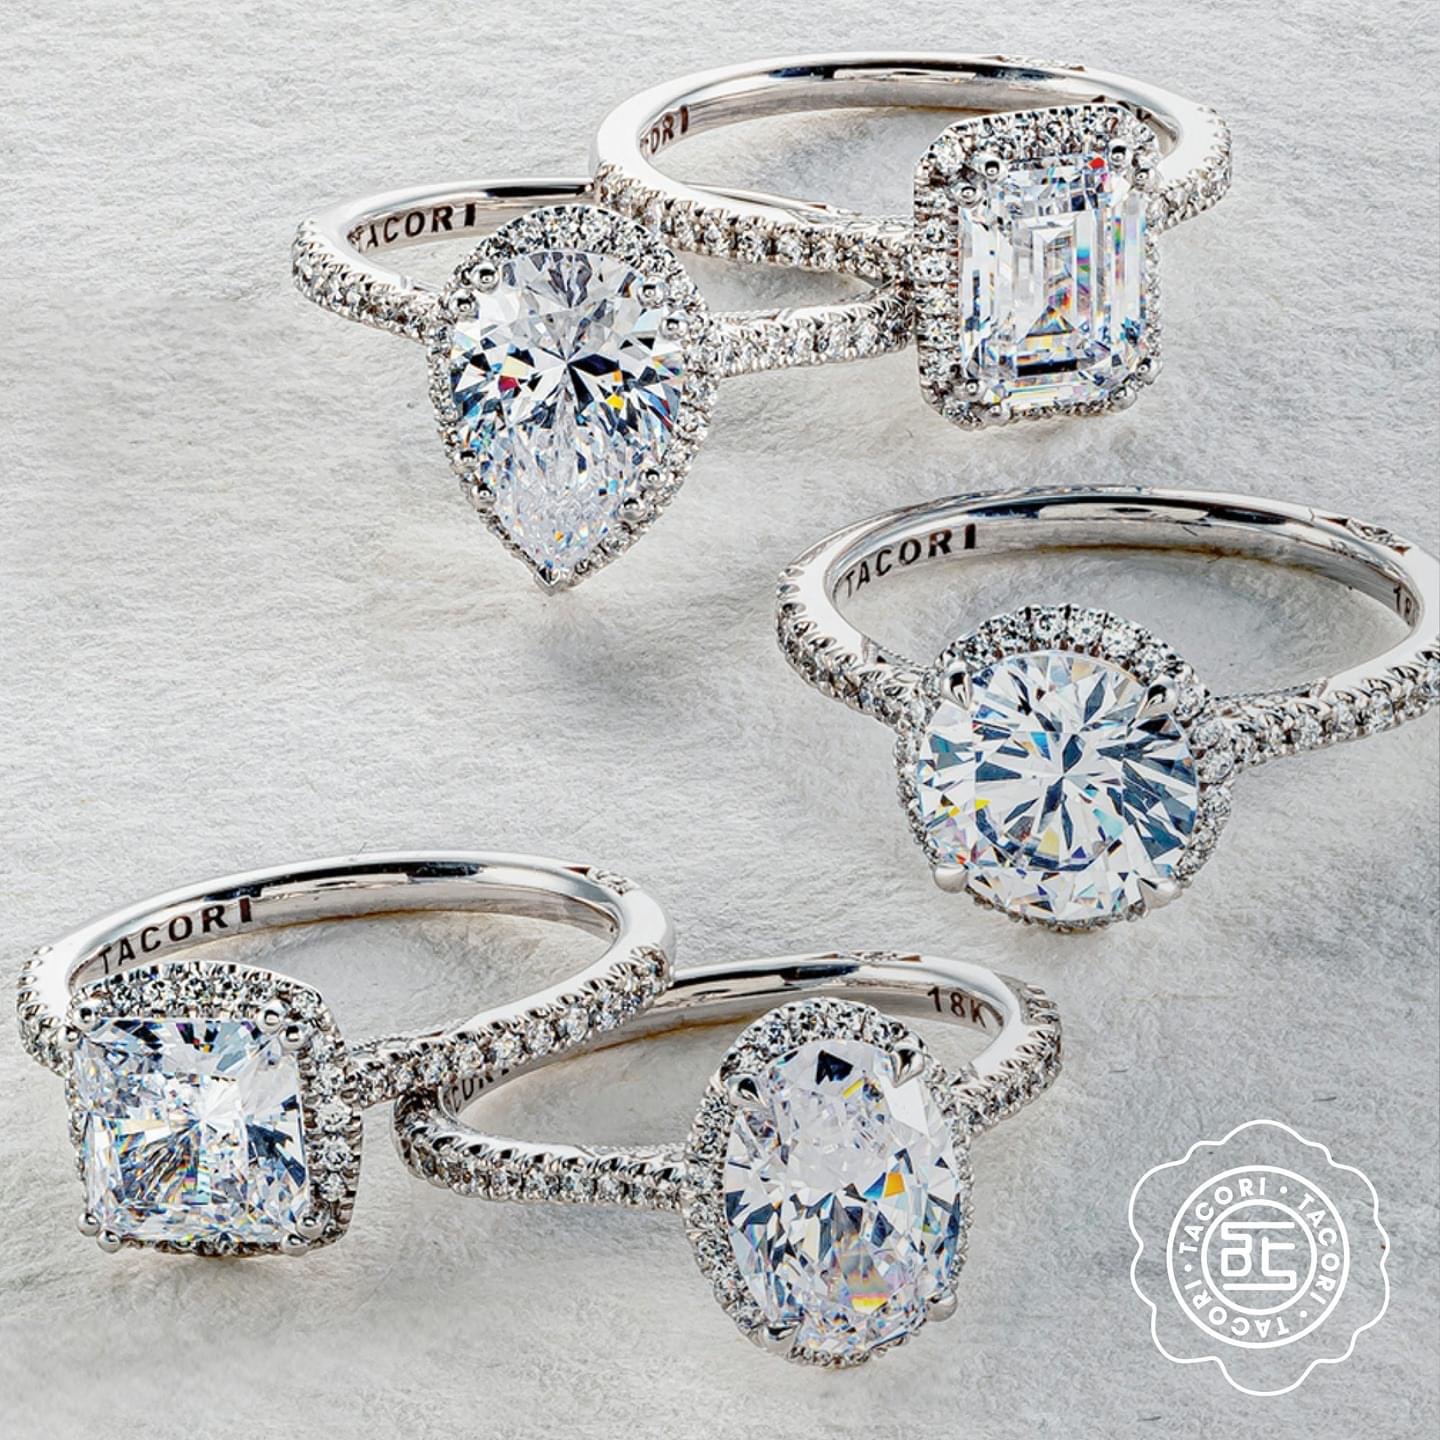 Tacori Ring Clearance Sale at Roman Jewelers, Online Event